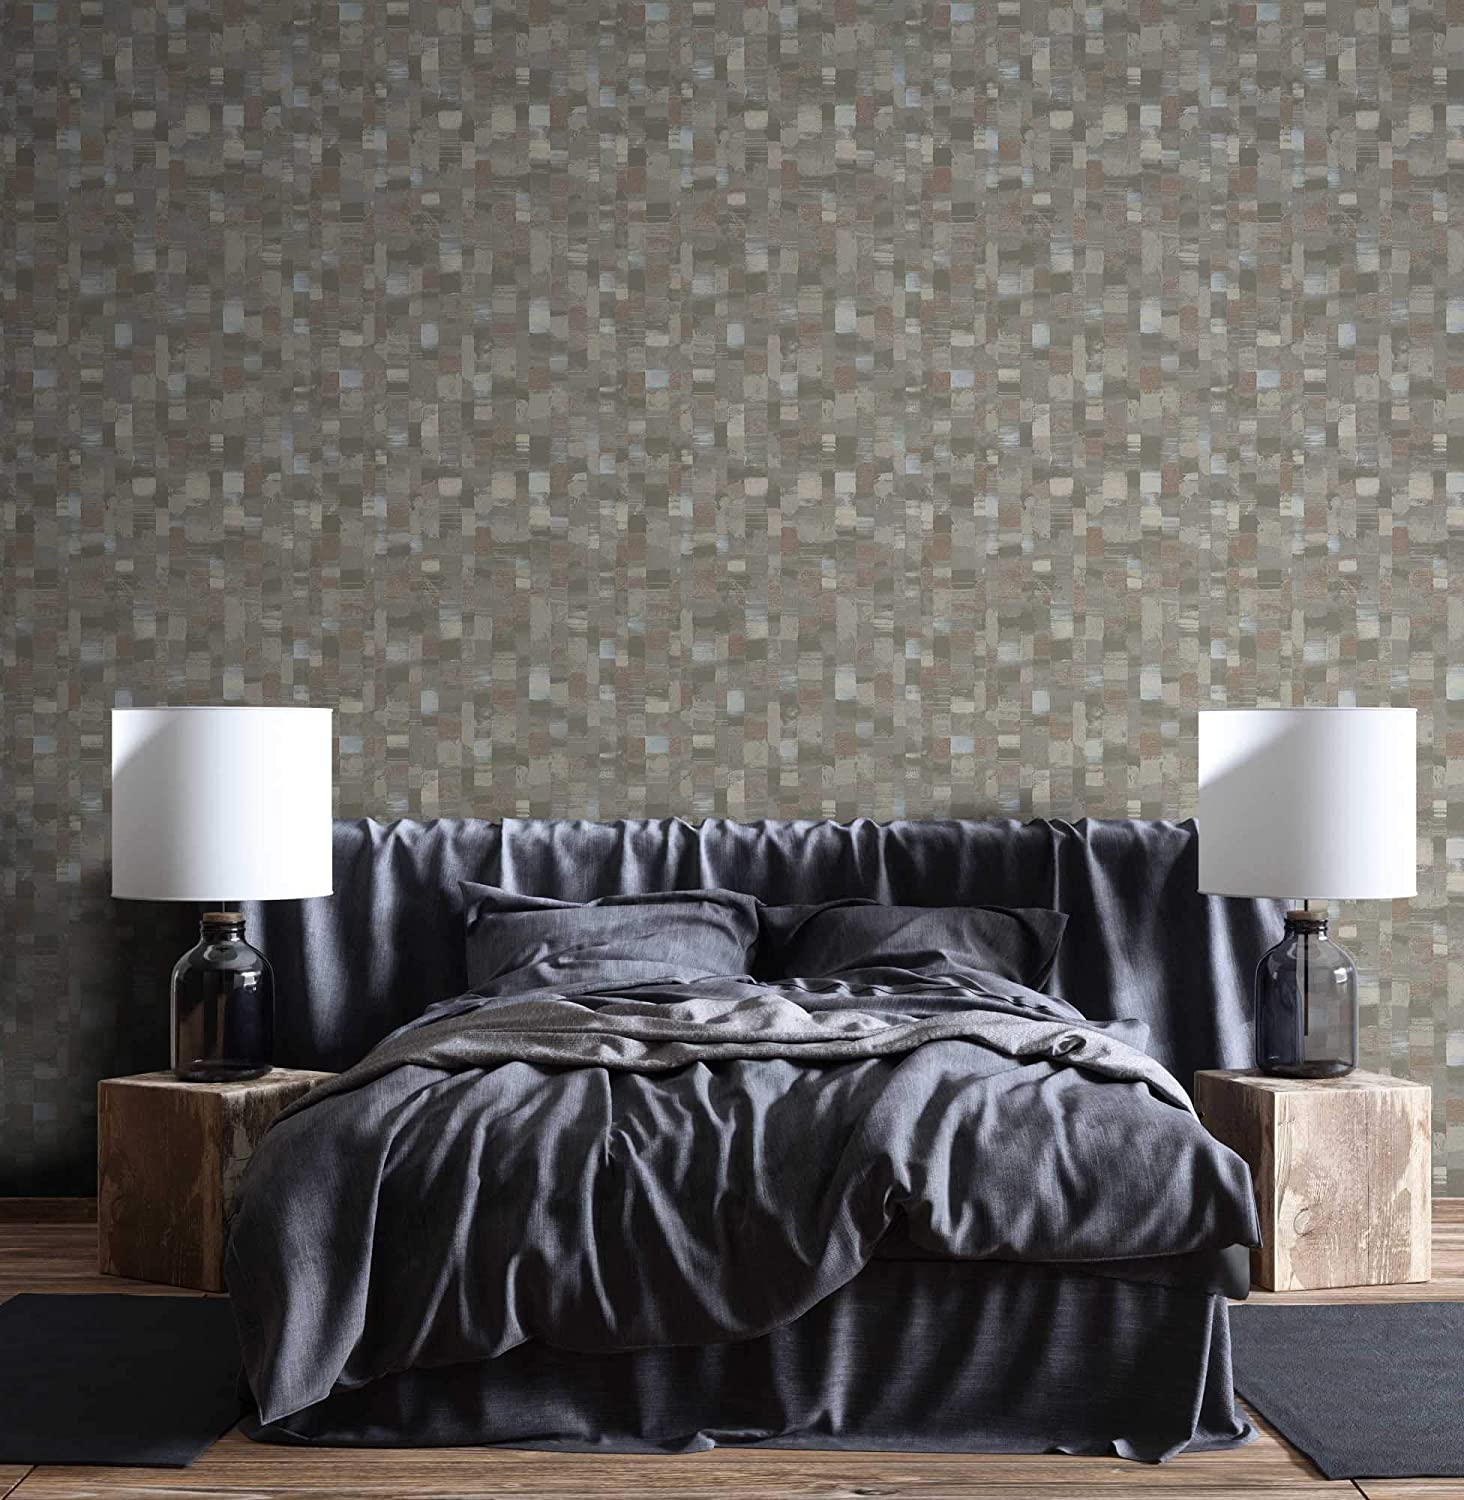 Newroom Graphic Brown Geometric Structure Graphic Non-Woven Wallpaper Modern Including Wallpaper Guide Graphic